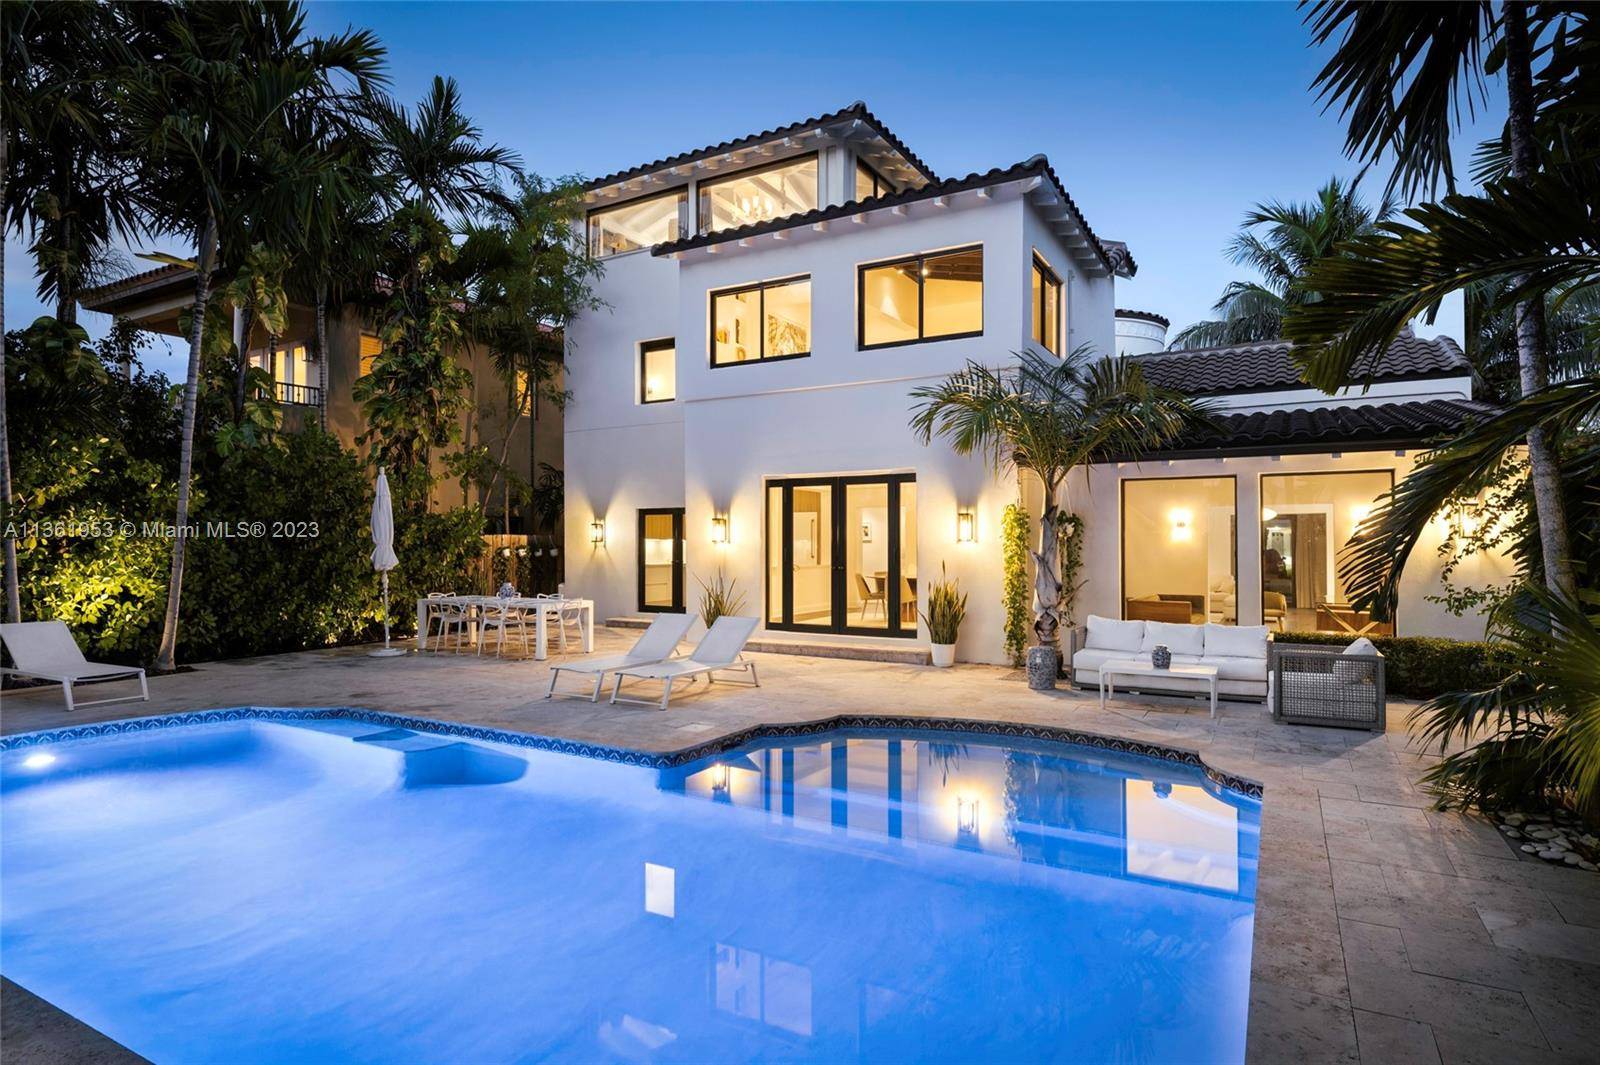 Indulge in luxury living at this exceptional Mediterranean style gem on coveted La Gorce Dr, Miami Beach.